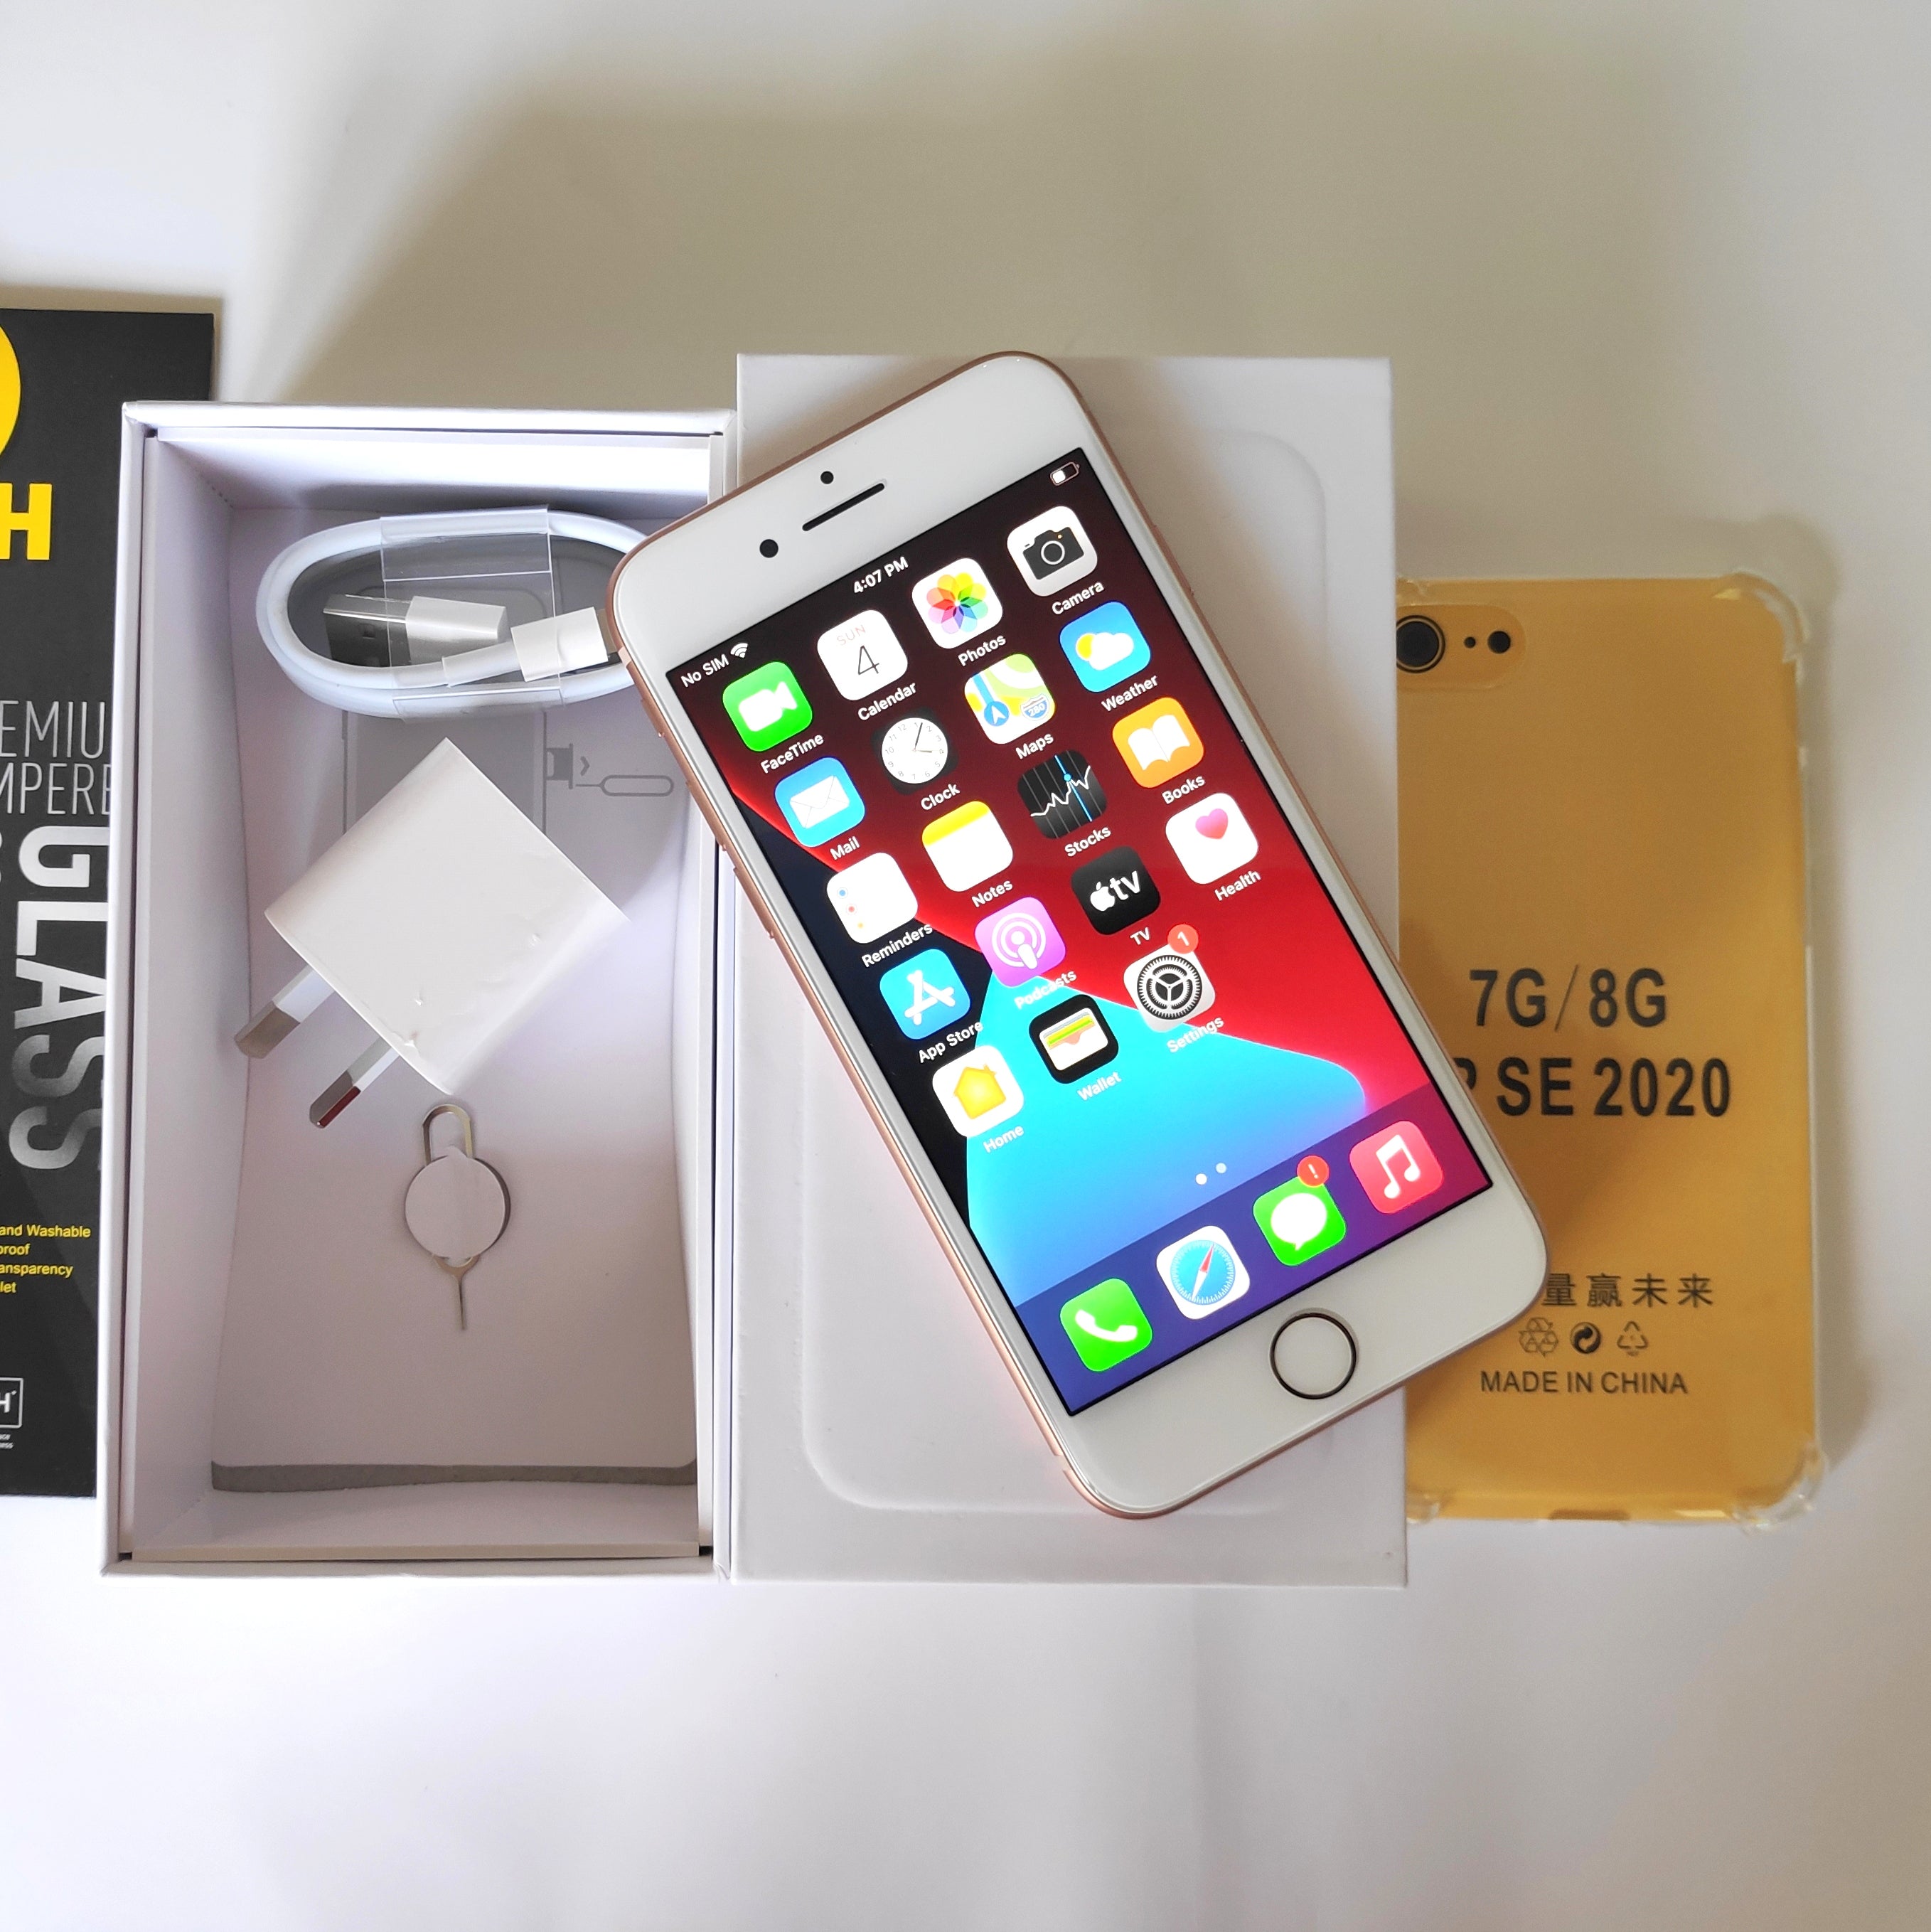 Apple iPhone 8 64GB Gold - New Battery, Case, Screen Protector & Shipping (Acceptable)